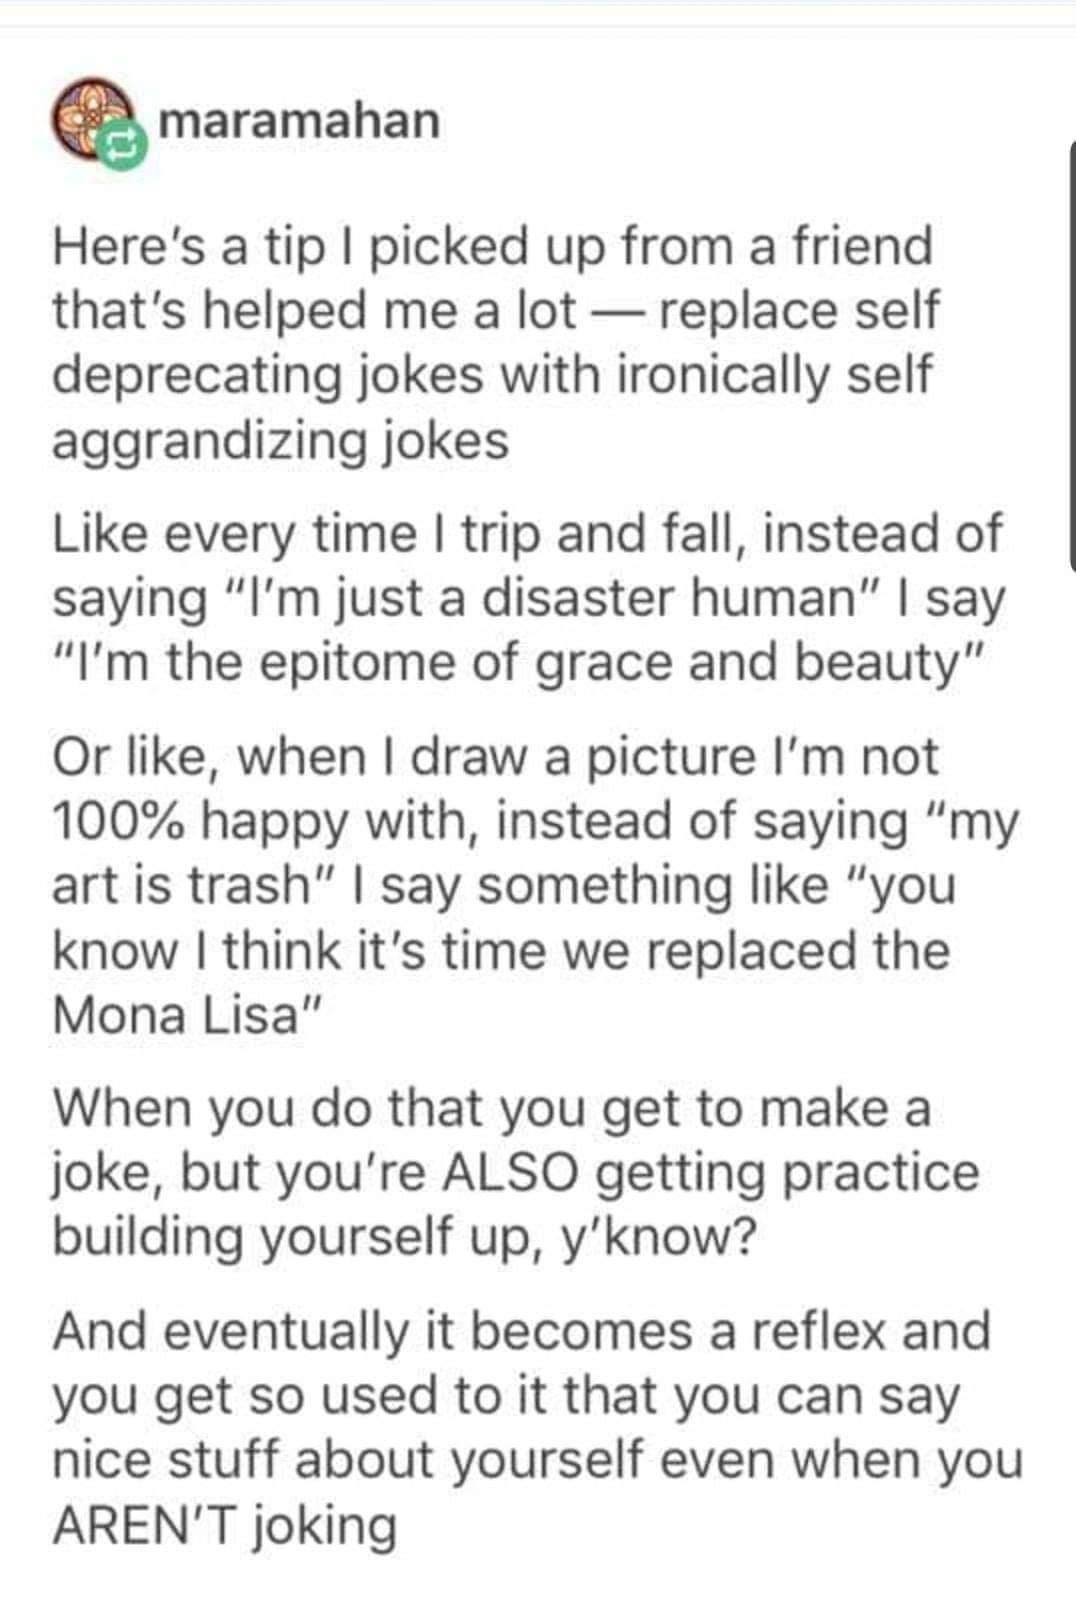 Disaster Human - maramahan Here's a tip I picked up from a friend that's helped me a lot replace self deprecating jokes with ironically self aggrandizing jokes every time I trip and fall, instead of saying "I'm just a disaster human" | say "I'm the epitom